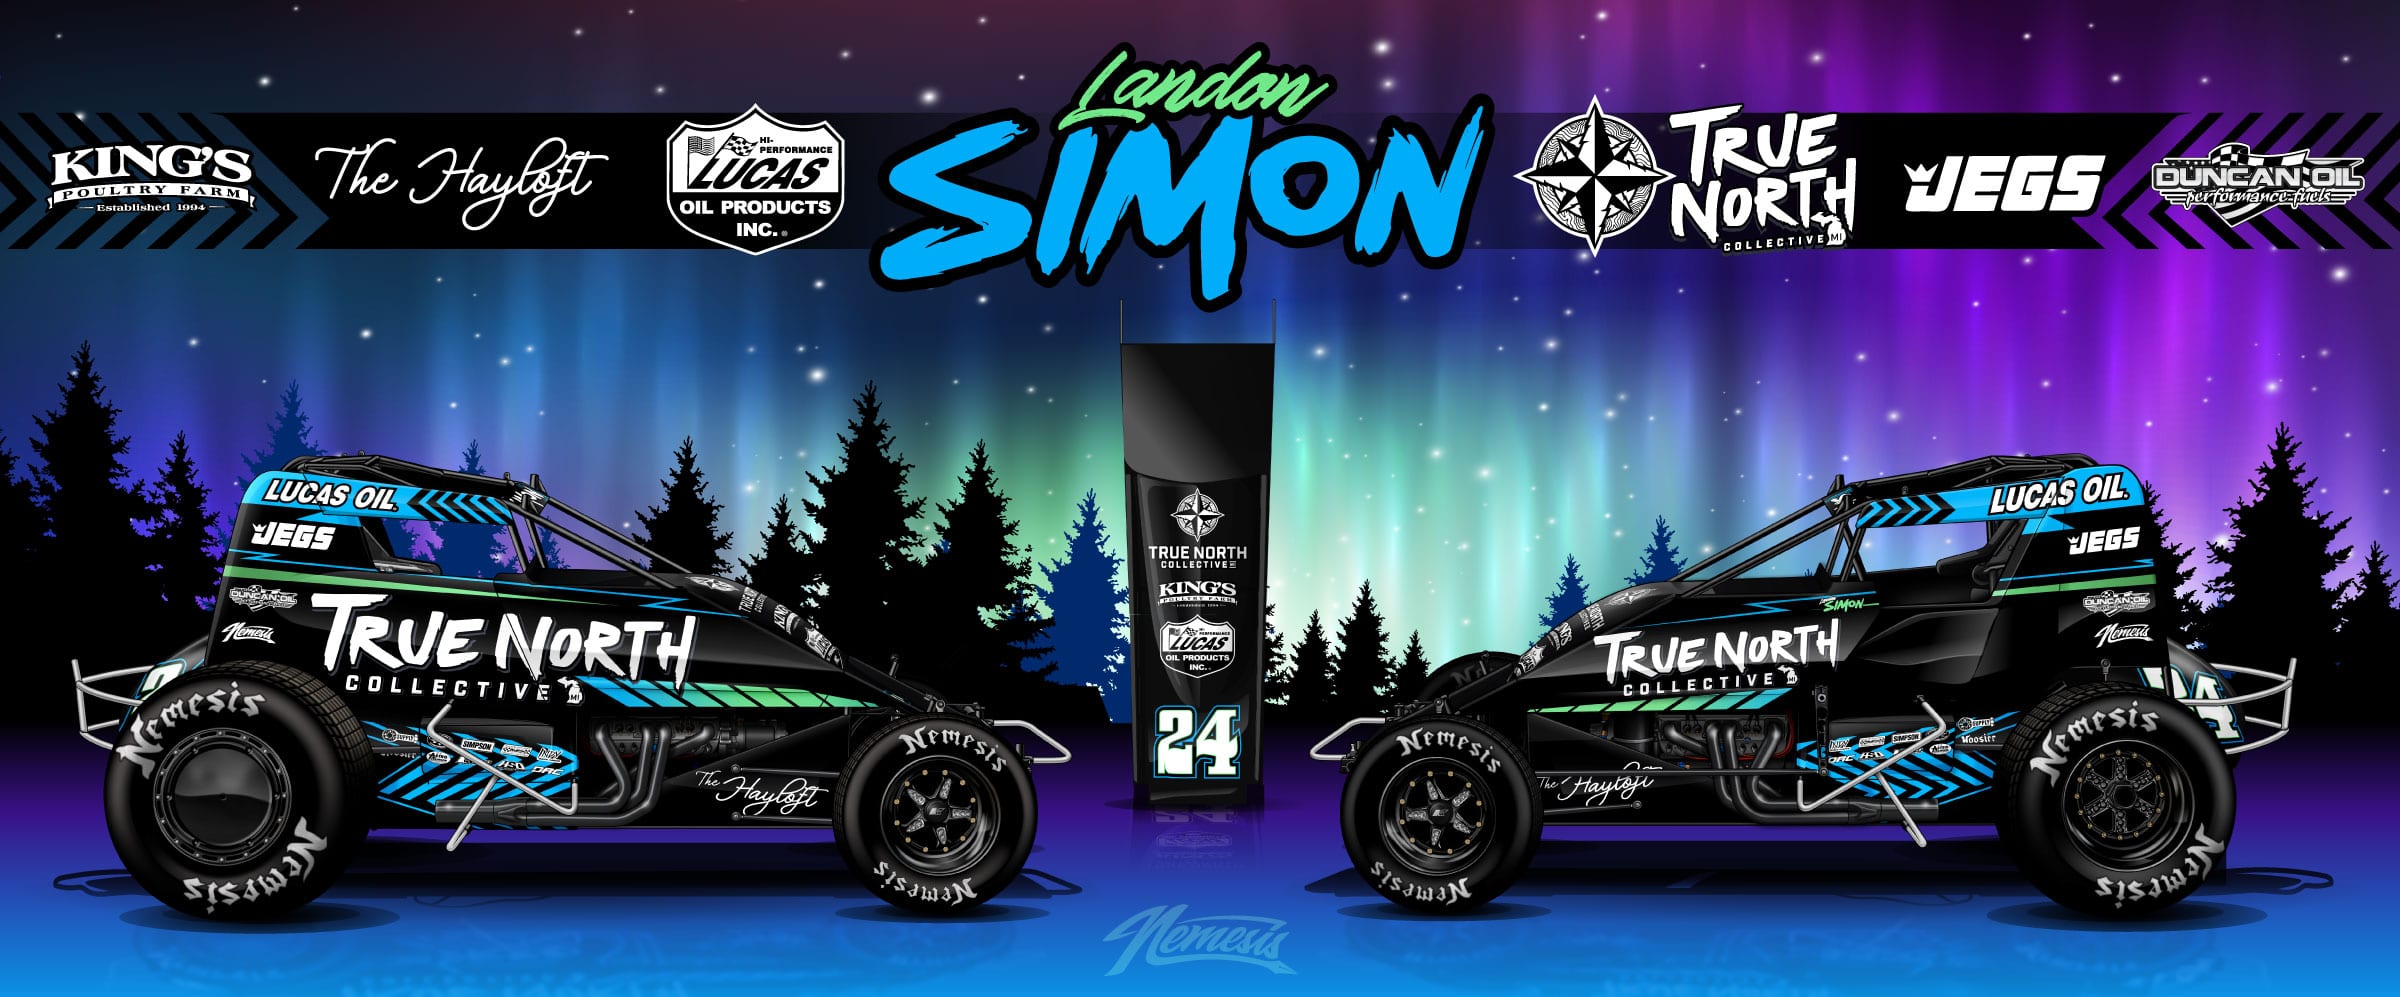 Landon Simon has inked an agreement with the True North Collective that runs through 2021.